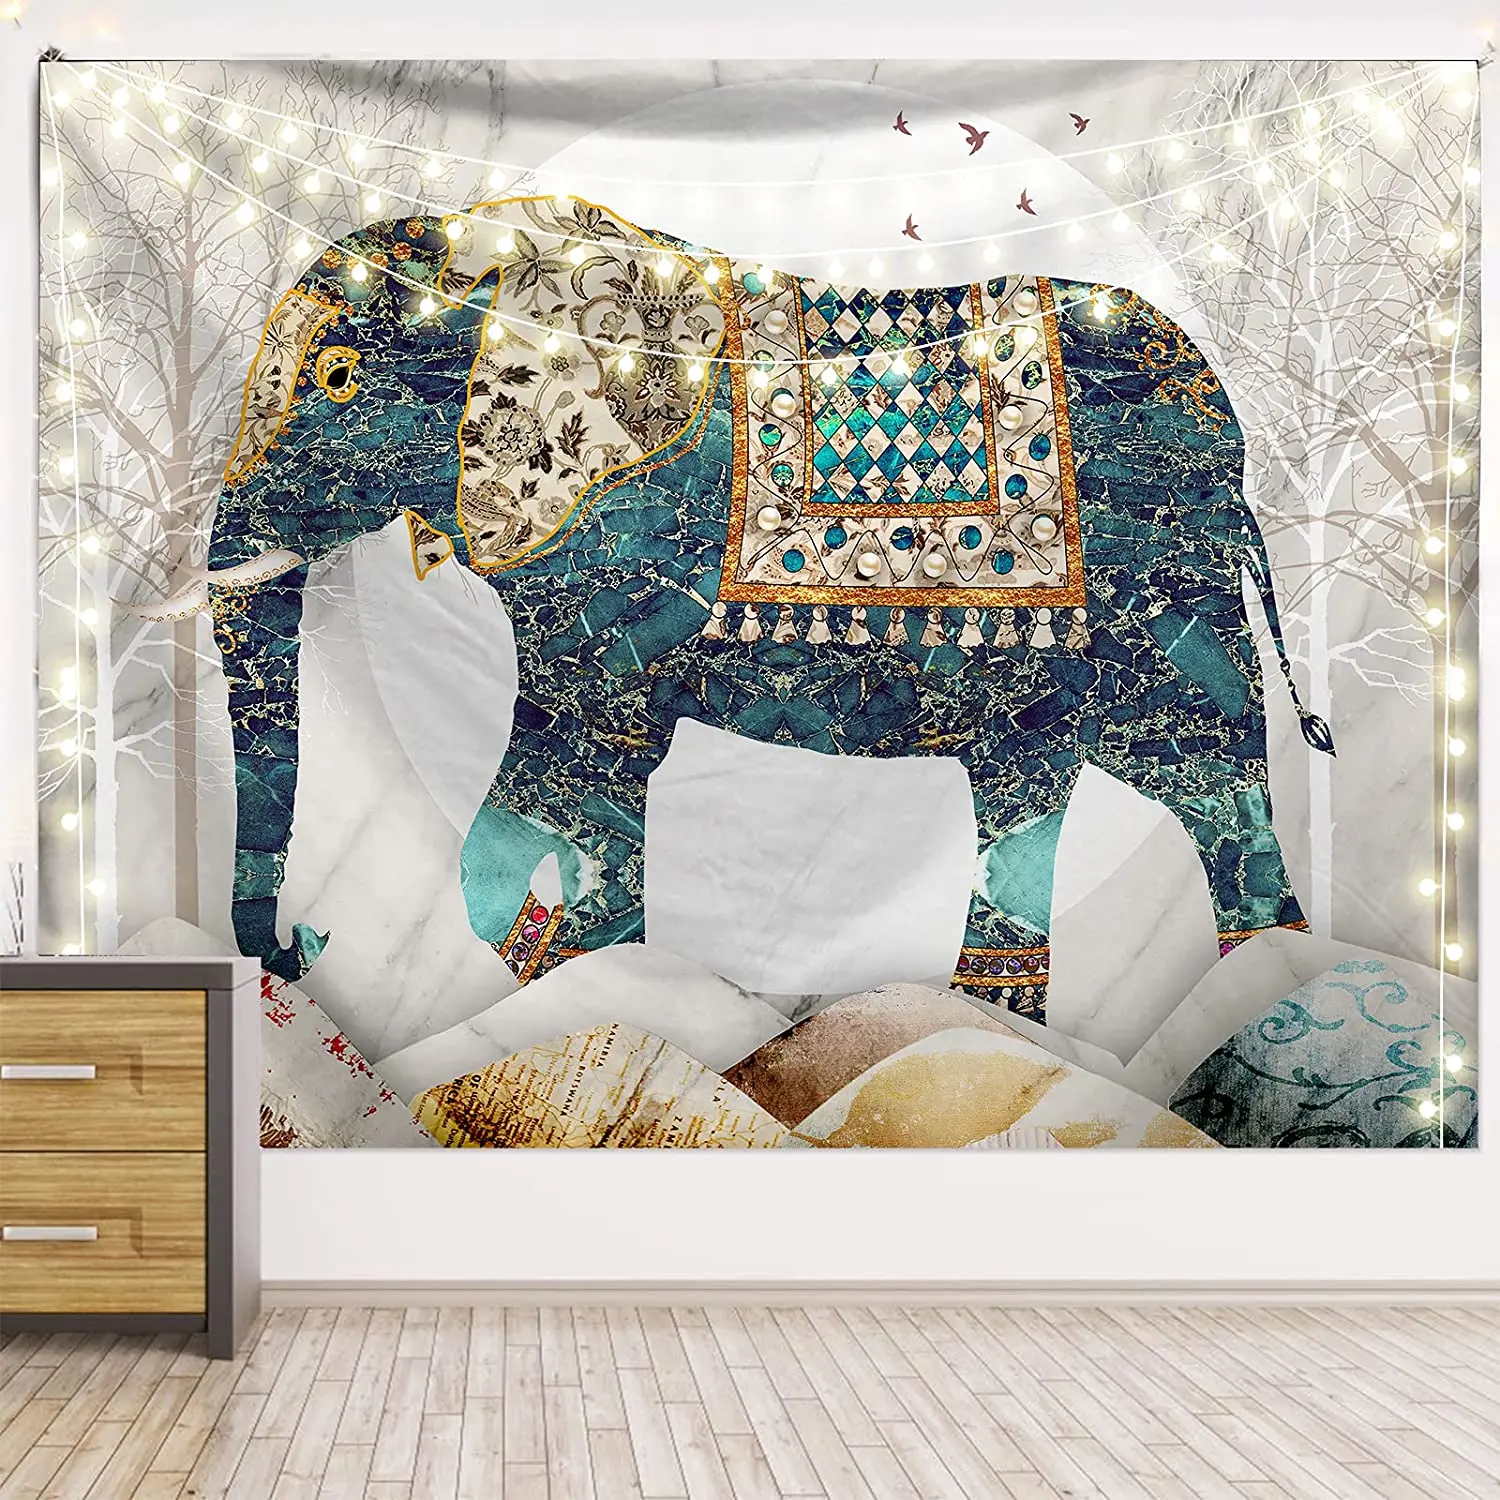 

Elephant Tapestry Forest Moon Tapestries Bohemian Hippie Boho Trippy Indie Aesthetic Wall Hanging Decor for Bedrooms Living Room